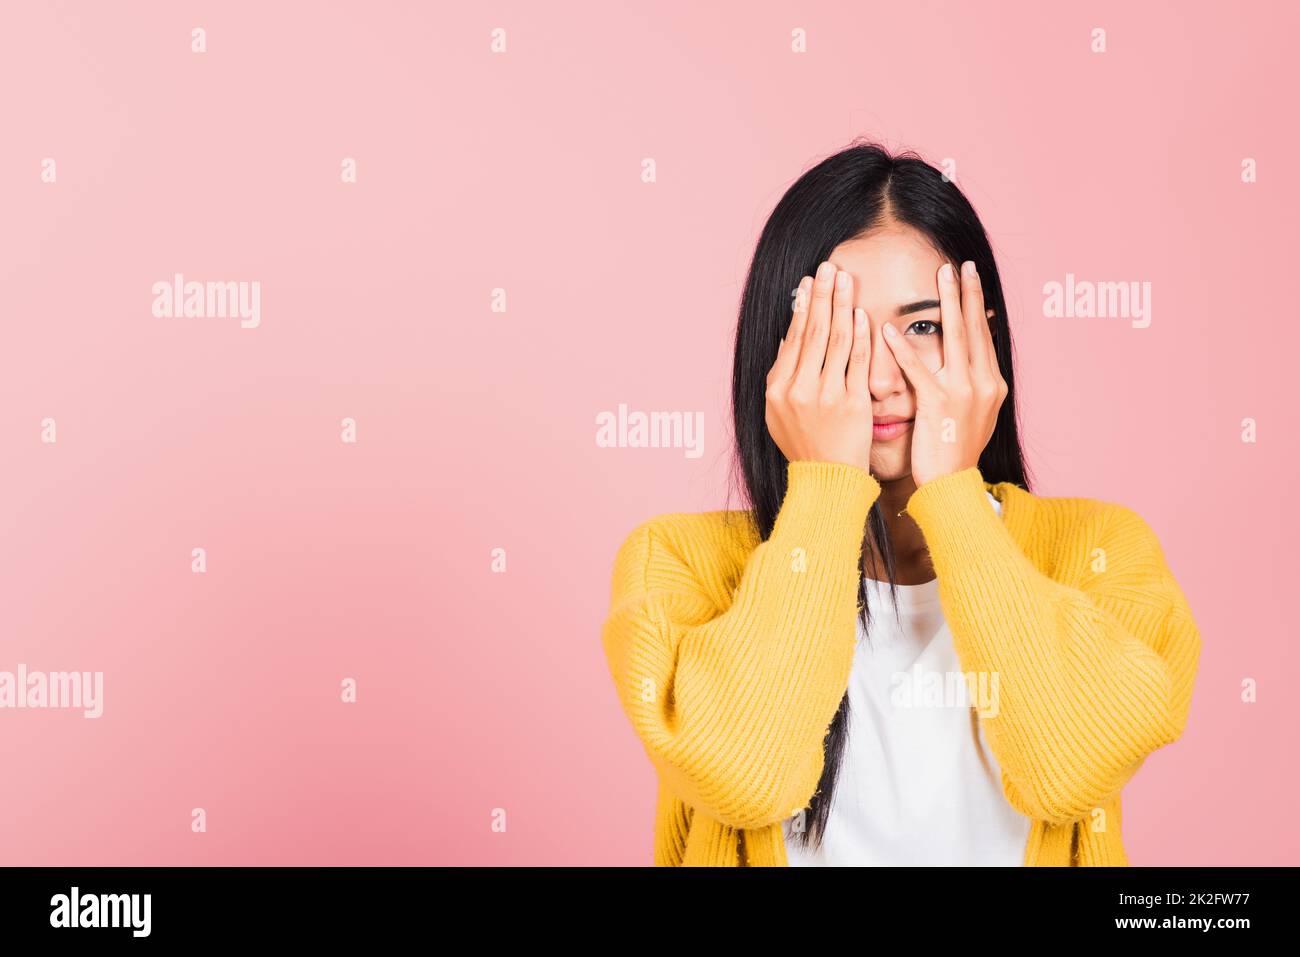 woman in depressed bad mood covering face with hands Stock Photo